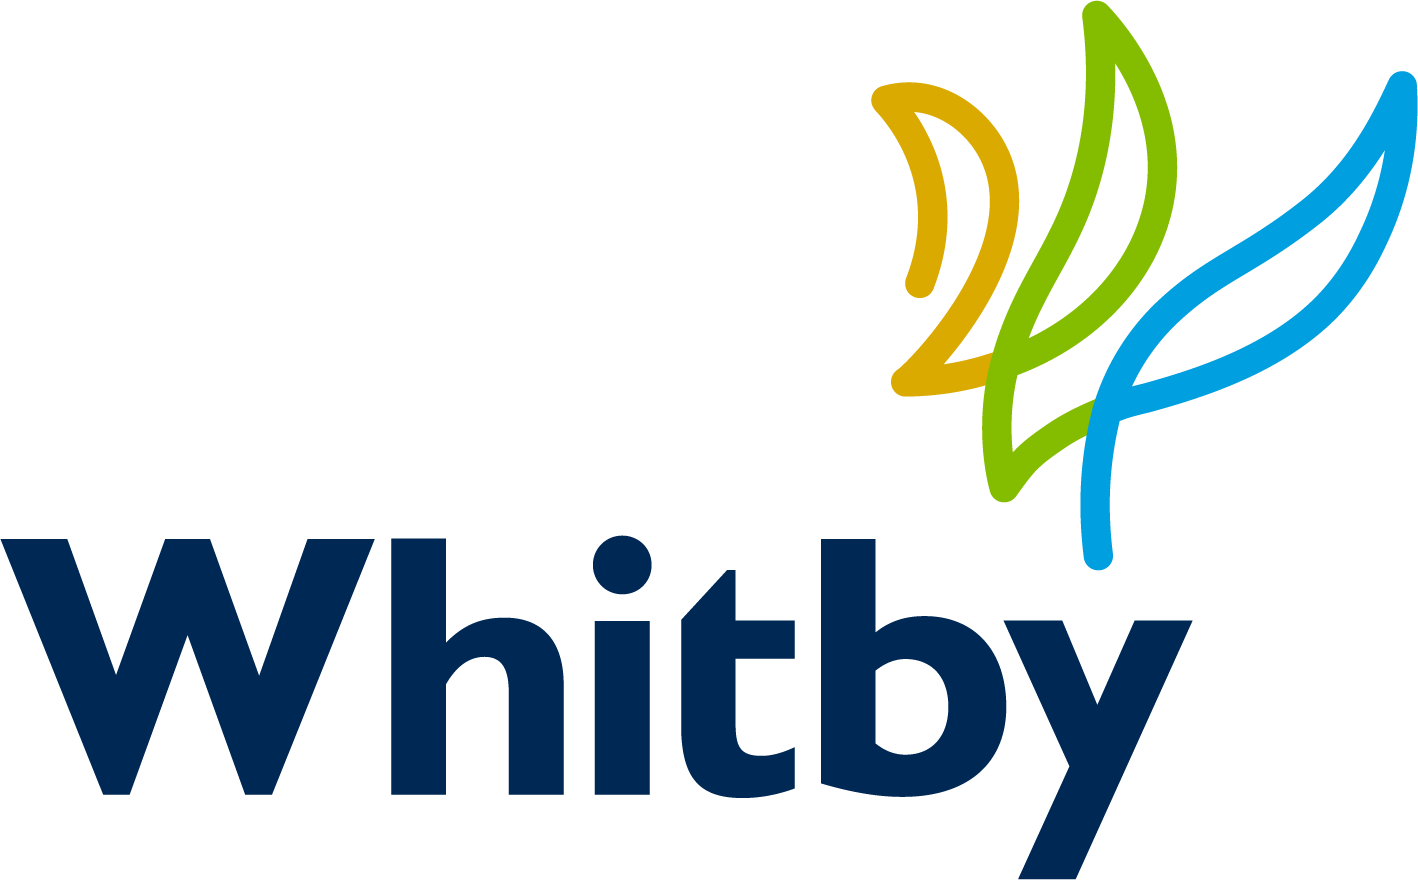 The Corporation of the Town of Whitby